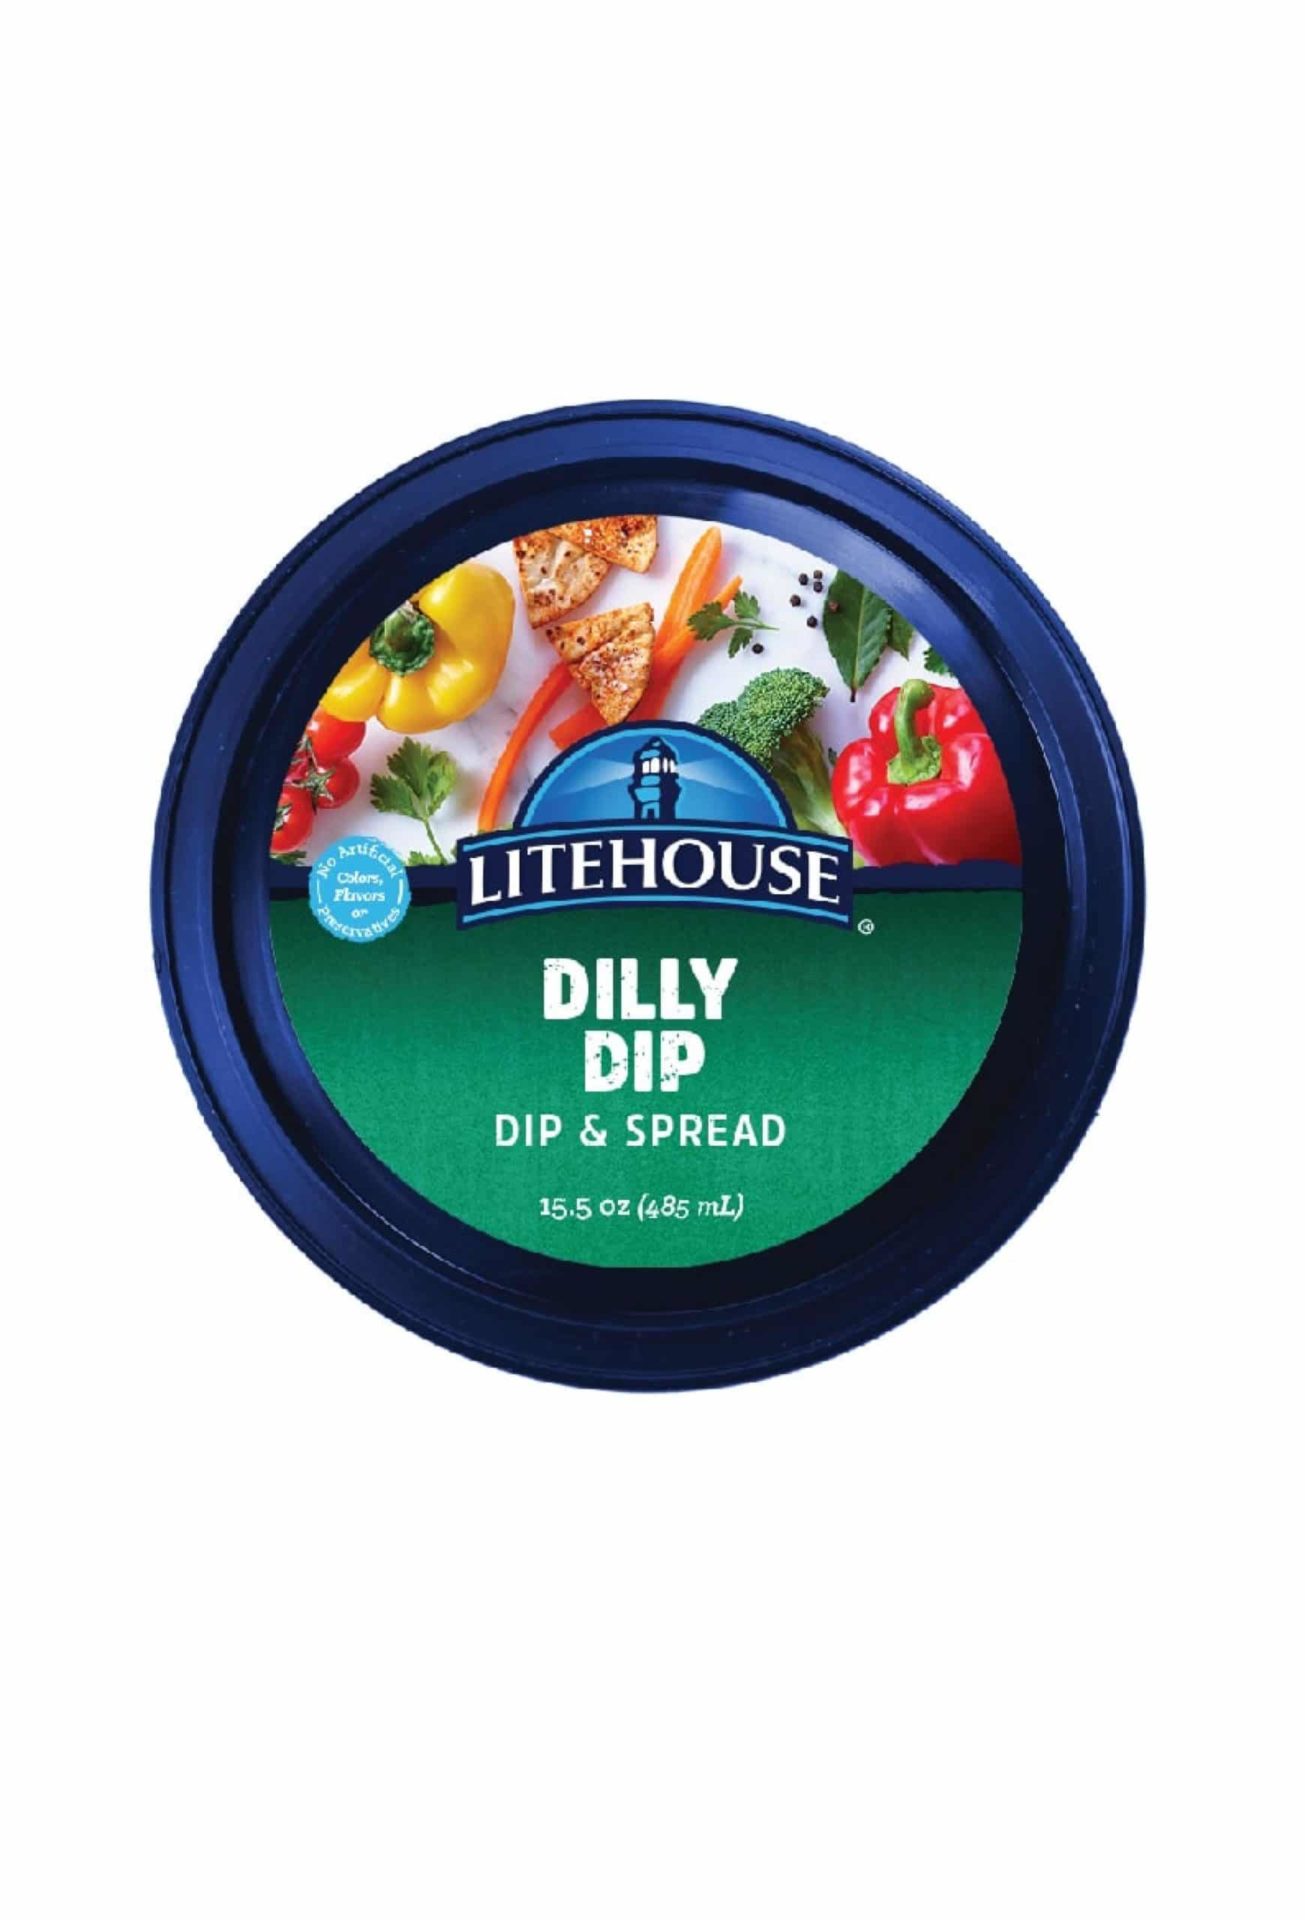 Find Dilly Dip